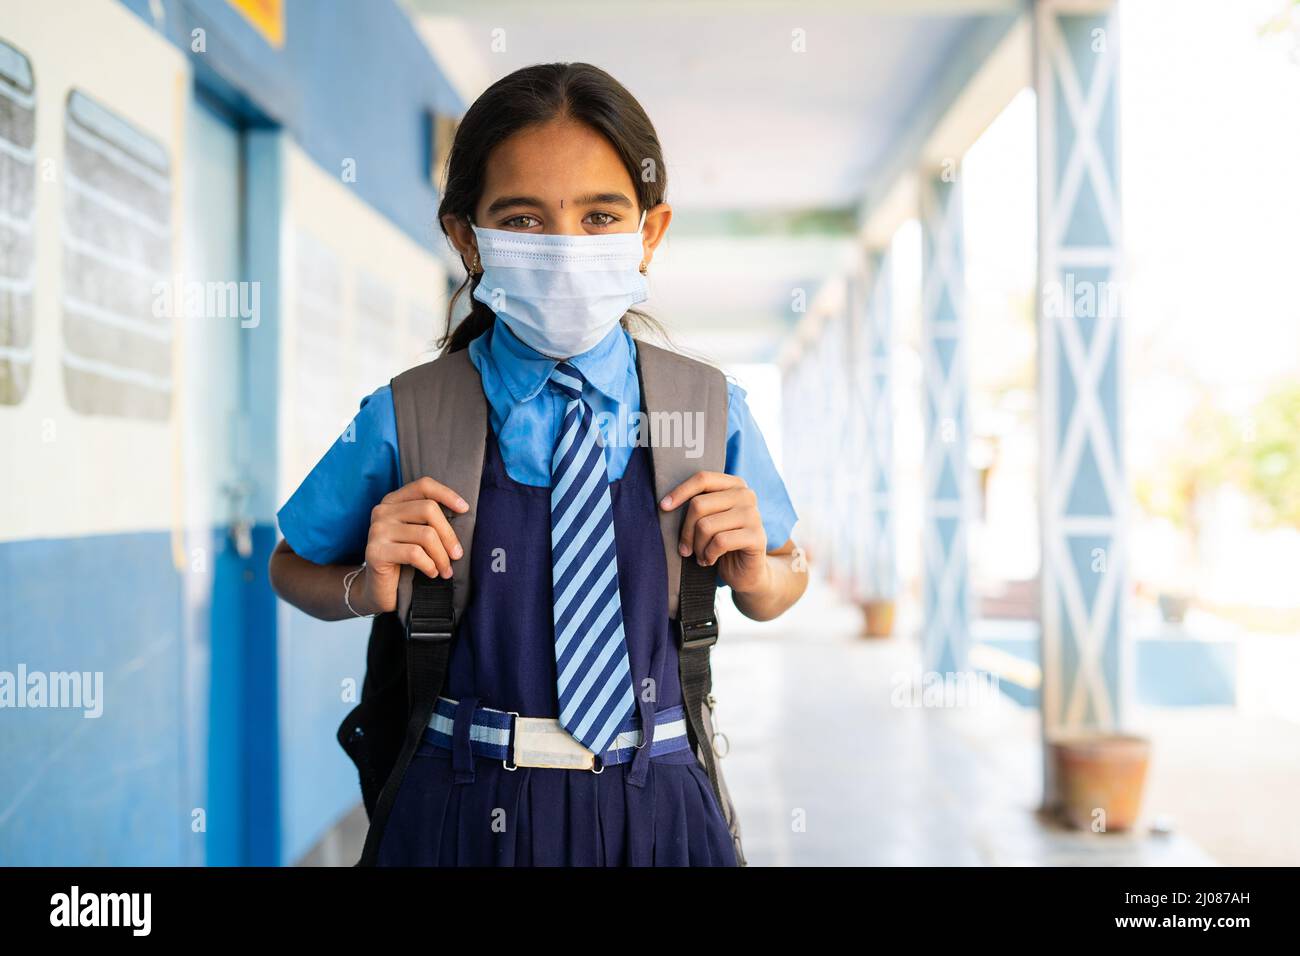 Girl kid in uniform with medical face mask standing at school corridor - concept of back to school, covid coronavirus protuction and healthcare safty Stock Photo